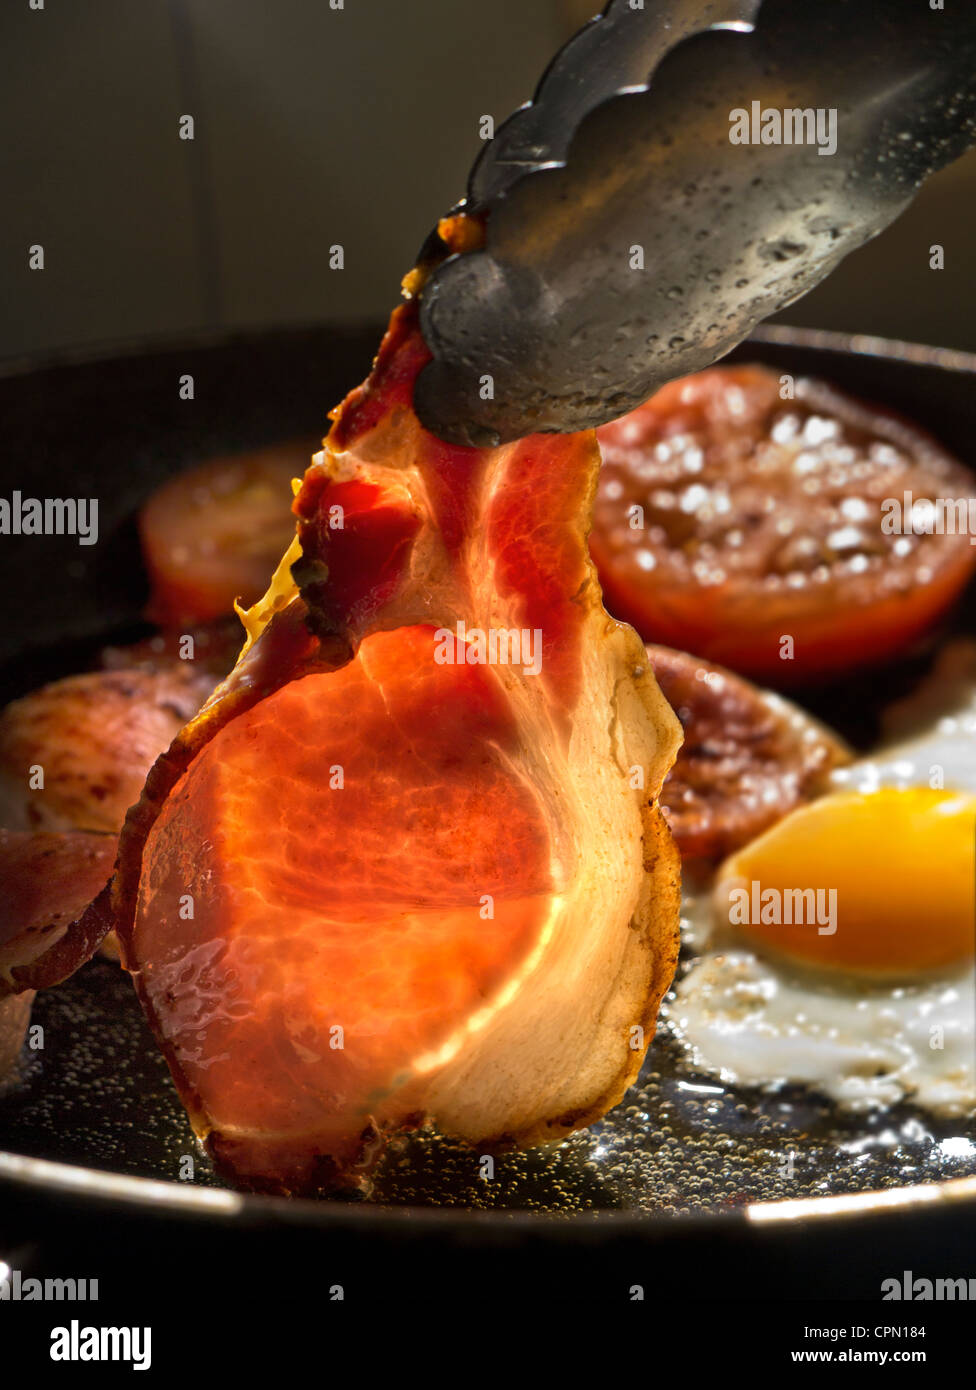 BACON EGGS TOMATOES FRYING in sunlight illuminating a rasher of organic back bacon being turned in a hot frying pan containing fried egg and tomatoes Stock Photo